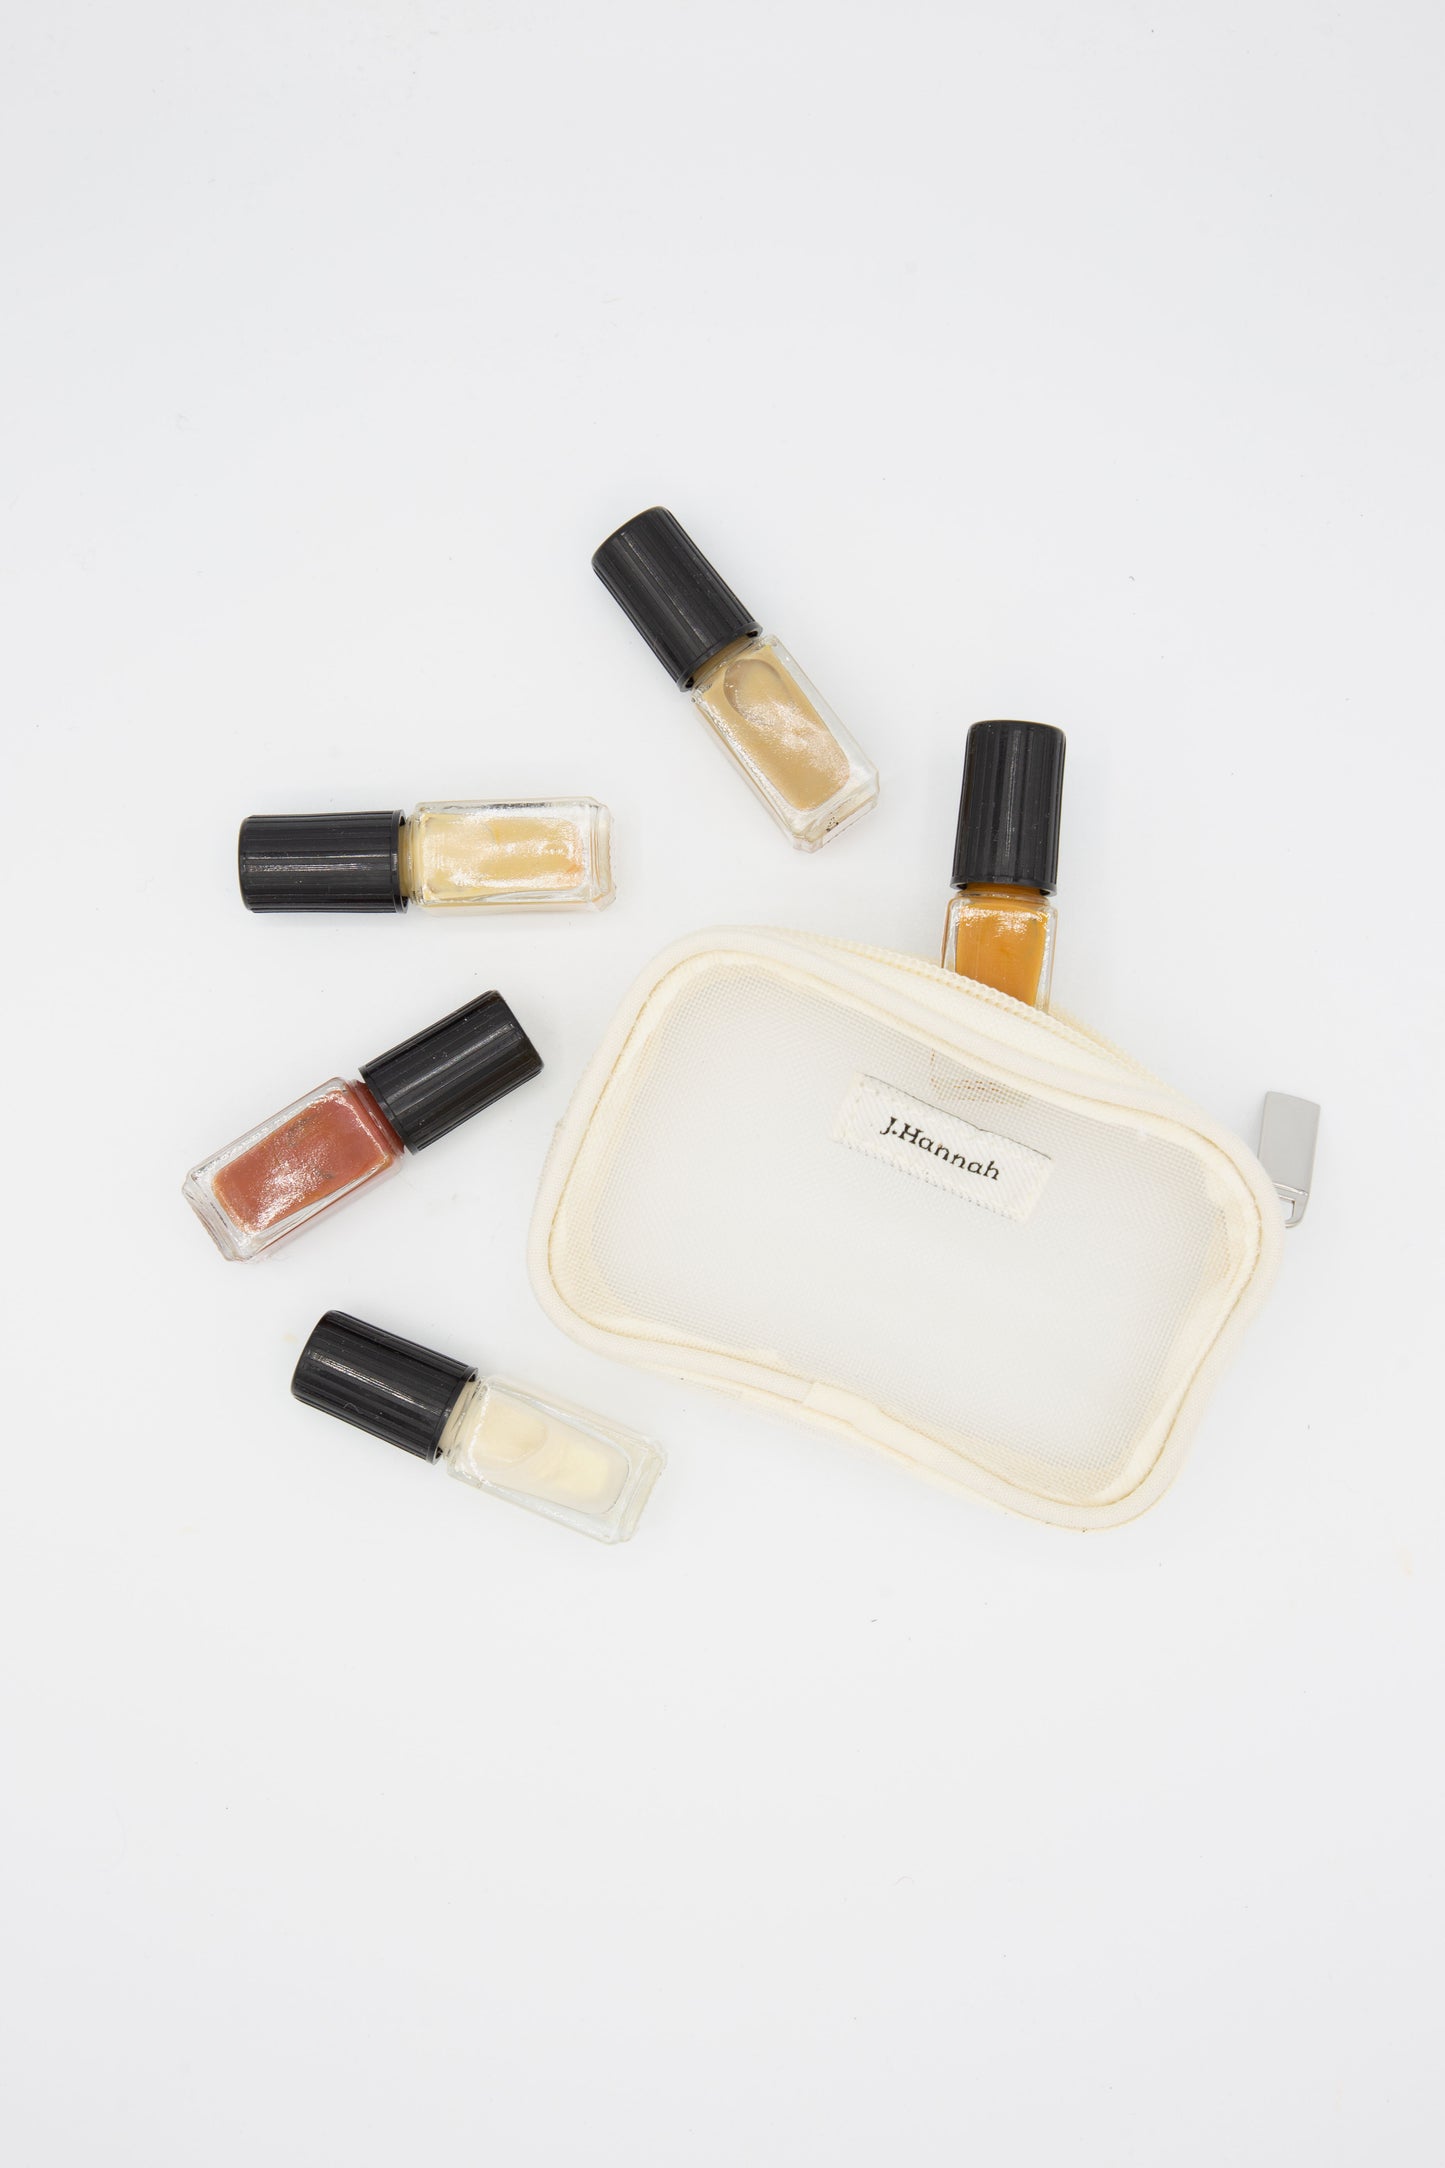 A small pouch with a few bottles of J. Hannah Mini Polish Set in Classics, part of a high quality and seven-free nail polish line, on a white surface.